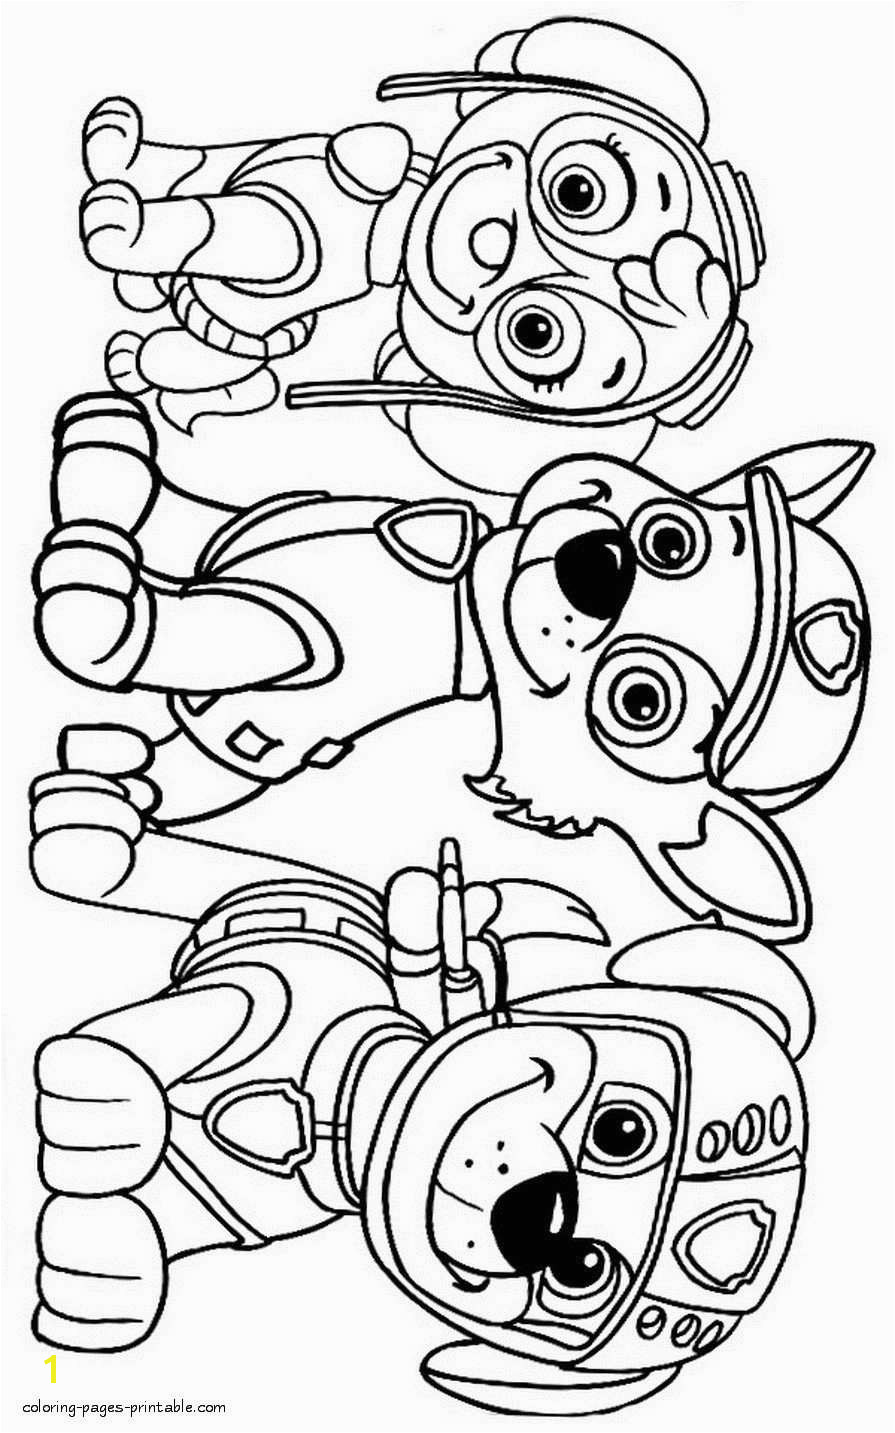 Printable Cute Puppy Coloring Pages Real Puppy Coloring Pages Best Printable Puppy Coloring Pages